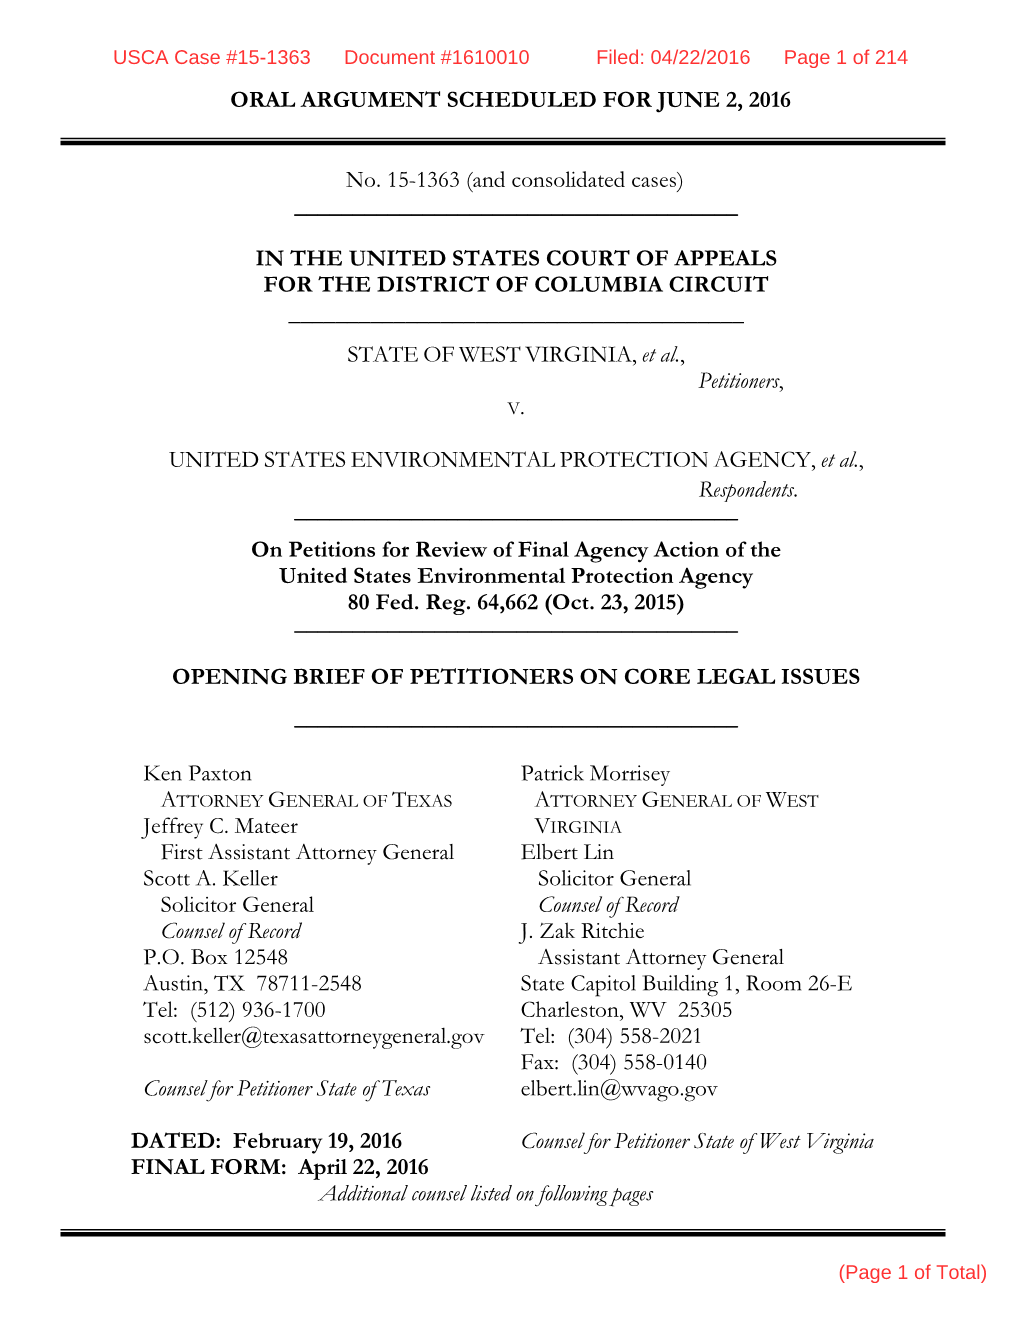 Petitioners' Opening Brief Pt. 1 [PDF]